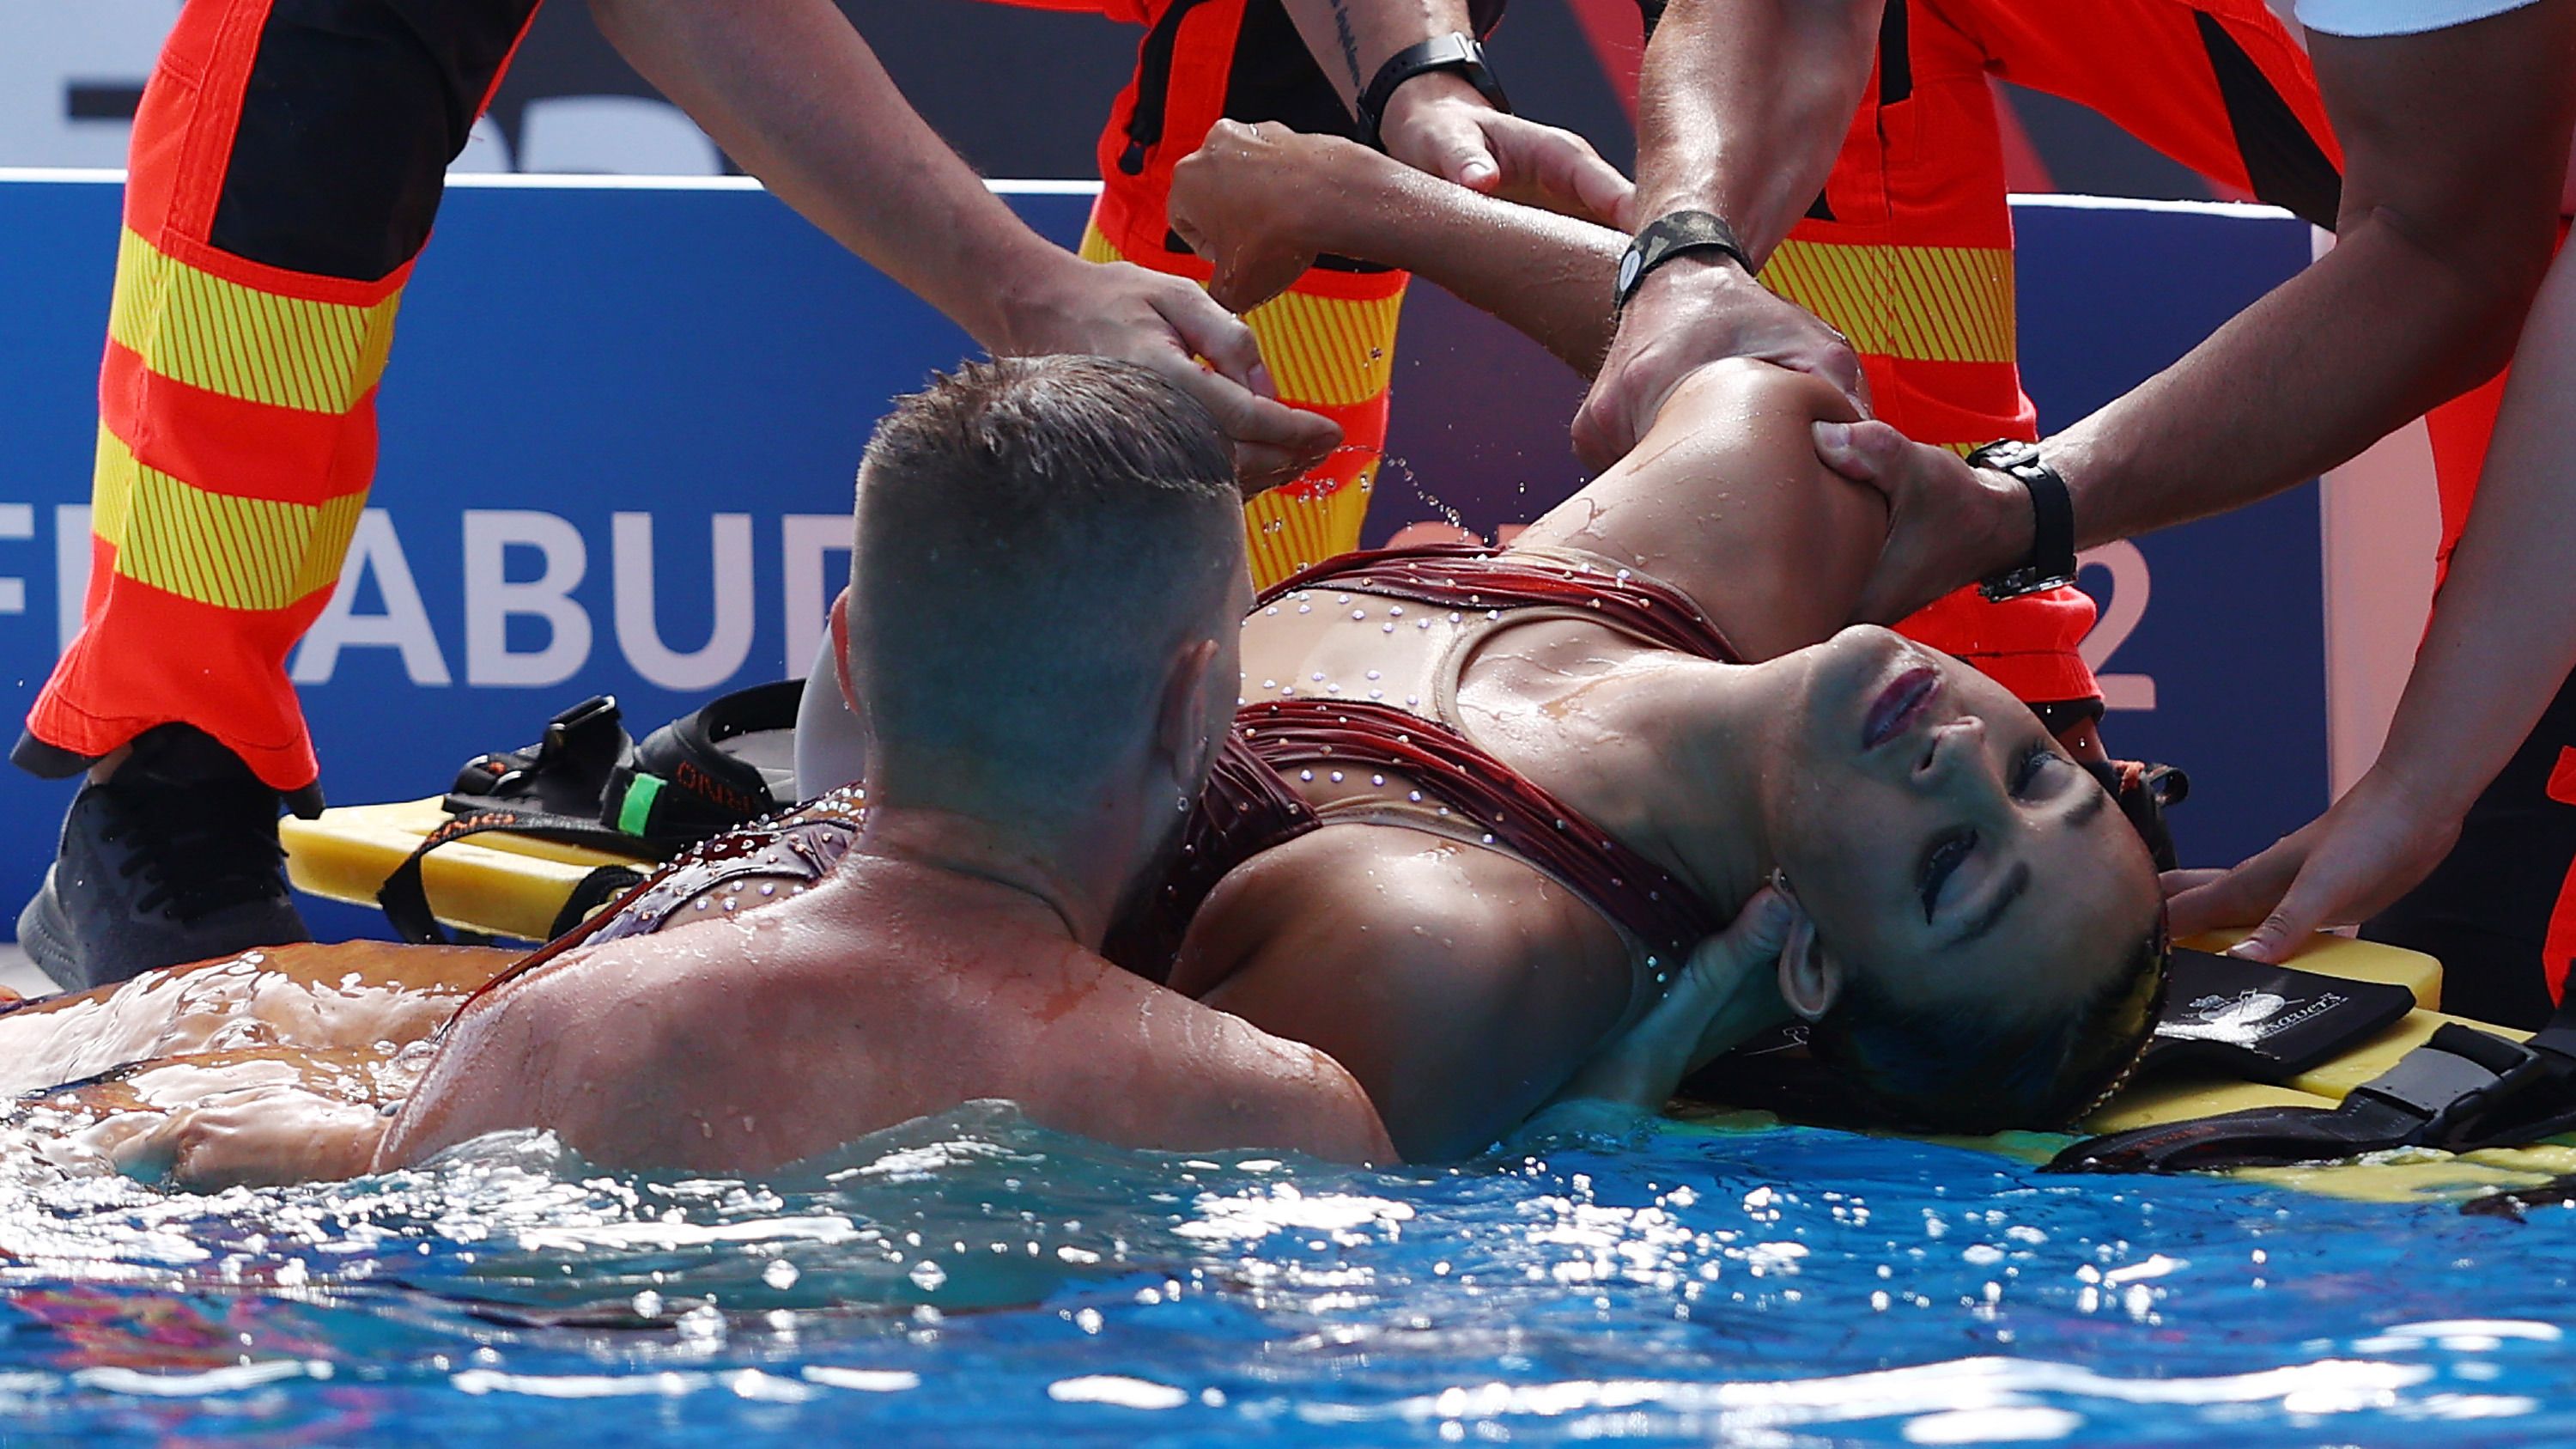 Swimmer rescued by coach after losing consciousness mid-performance at FINA World Championships